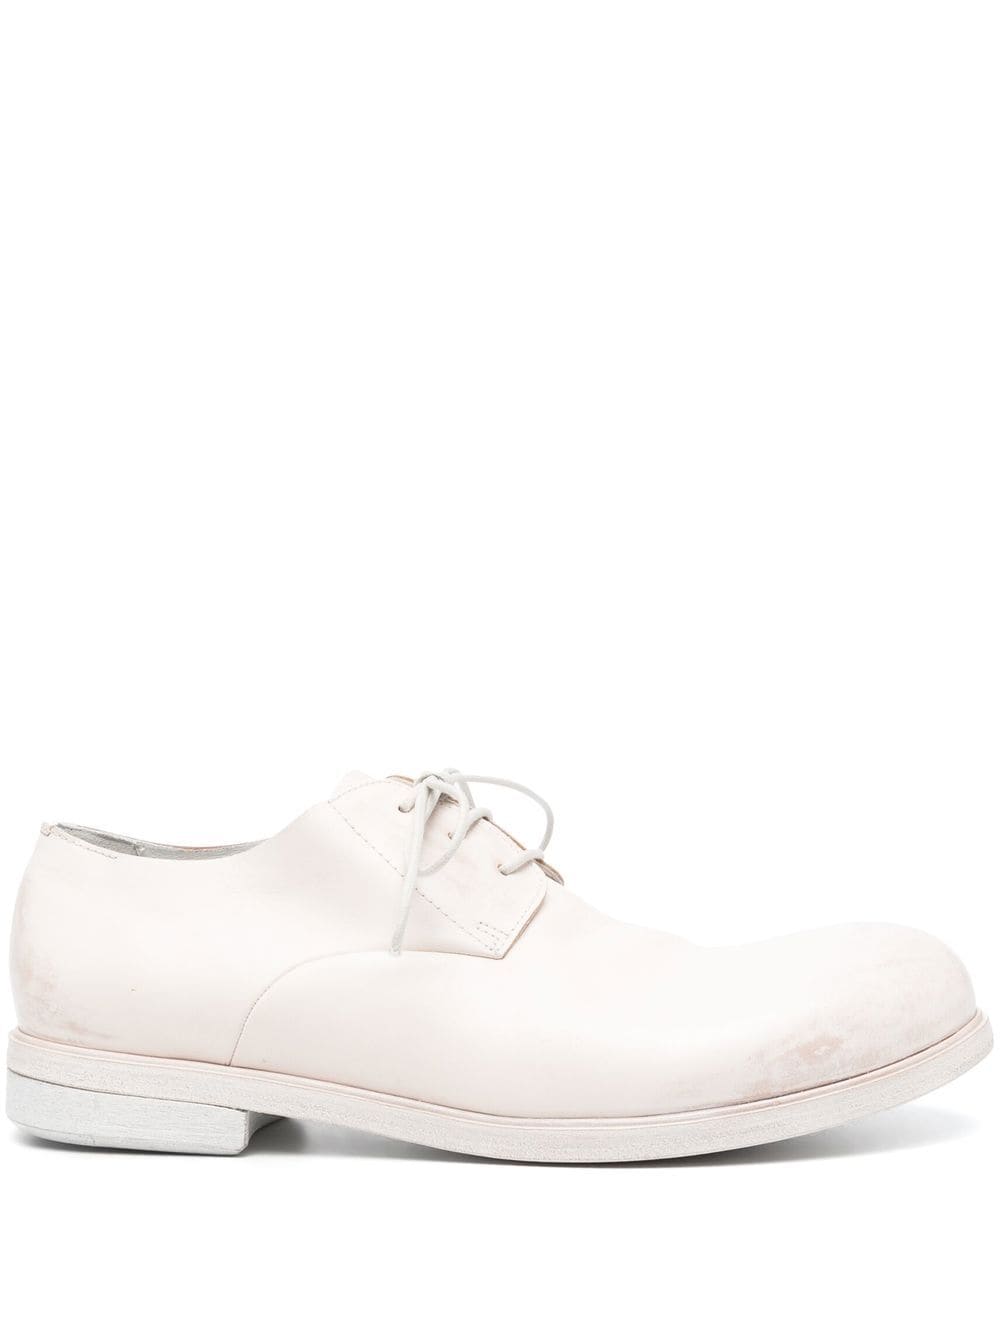 Marsèll Leather Derby Shoes In White